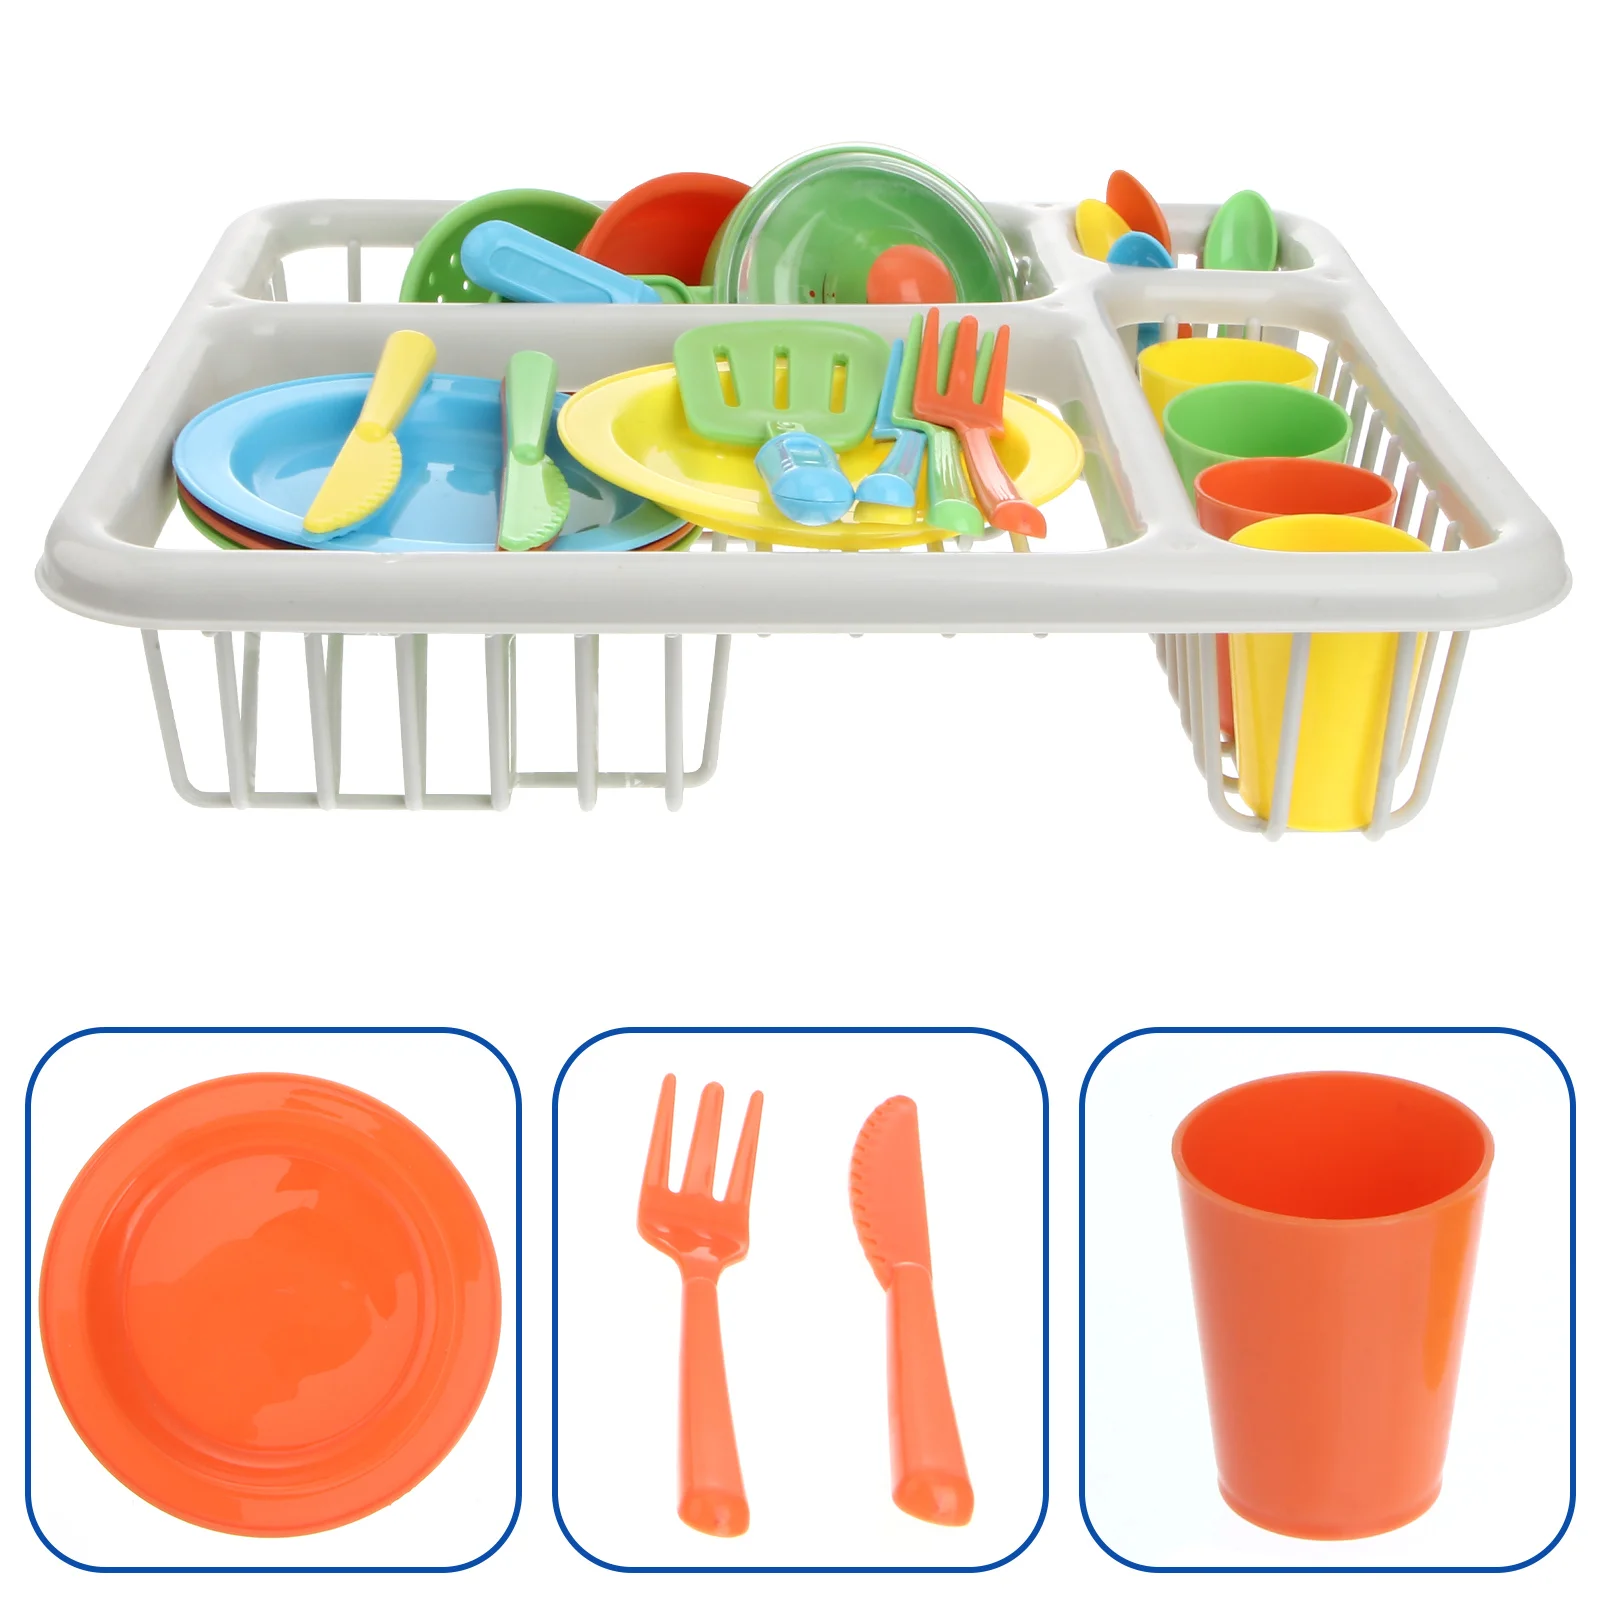 

Plastic Kitchen Set Kids Toys Parent-child Interactive Educational Playthings Playhouse Kitchenware Toddler Gifts